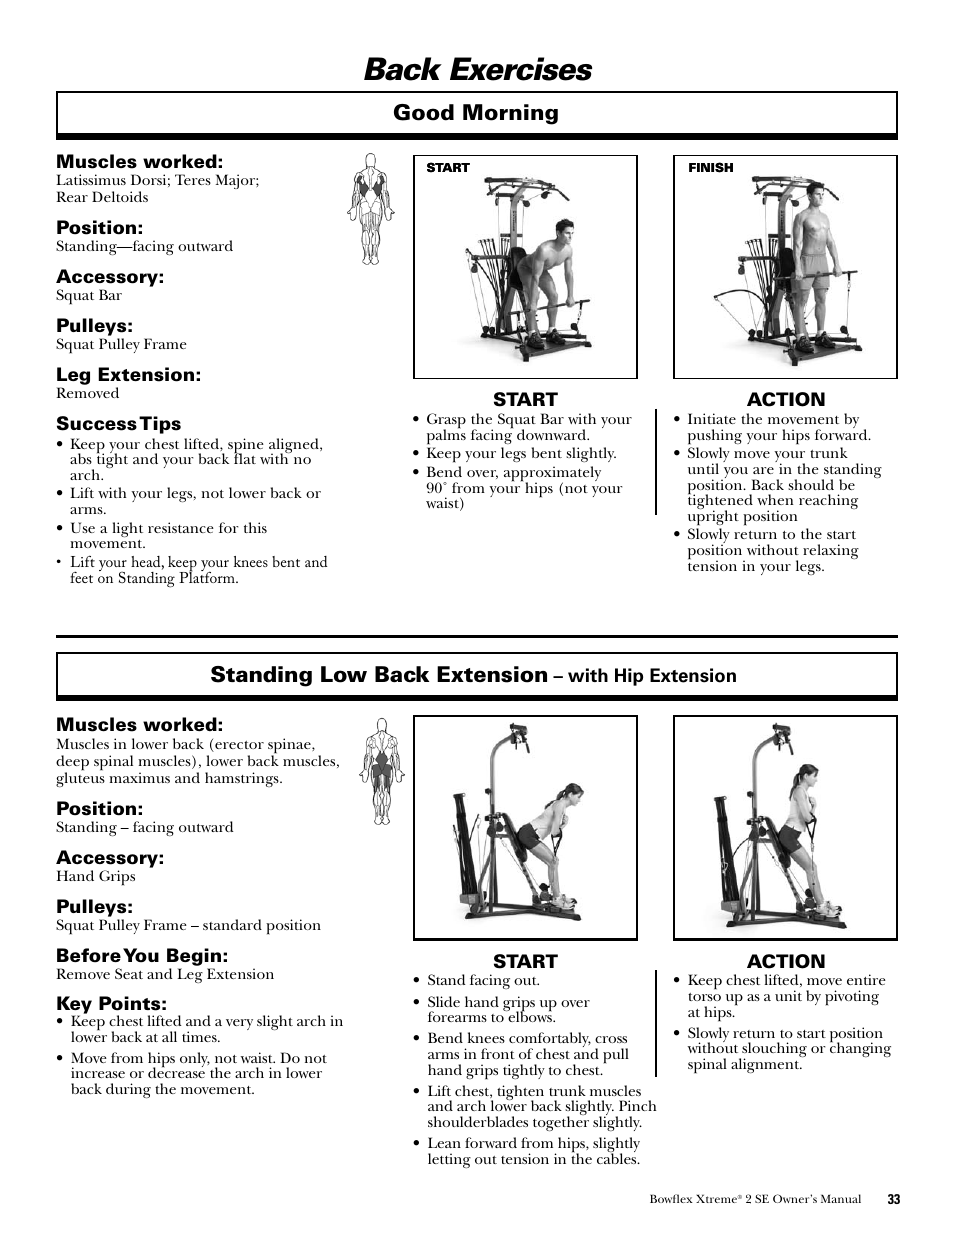  Bowflex back workouts for Build Muscle